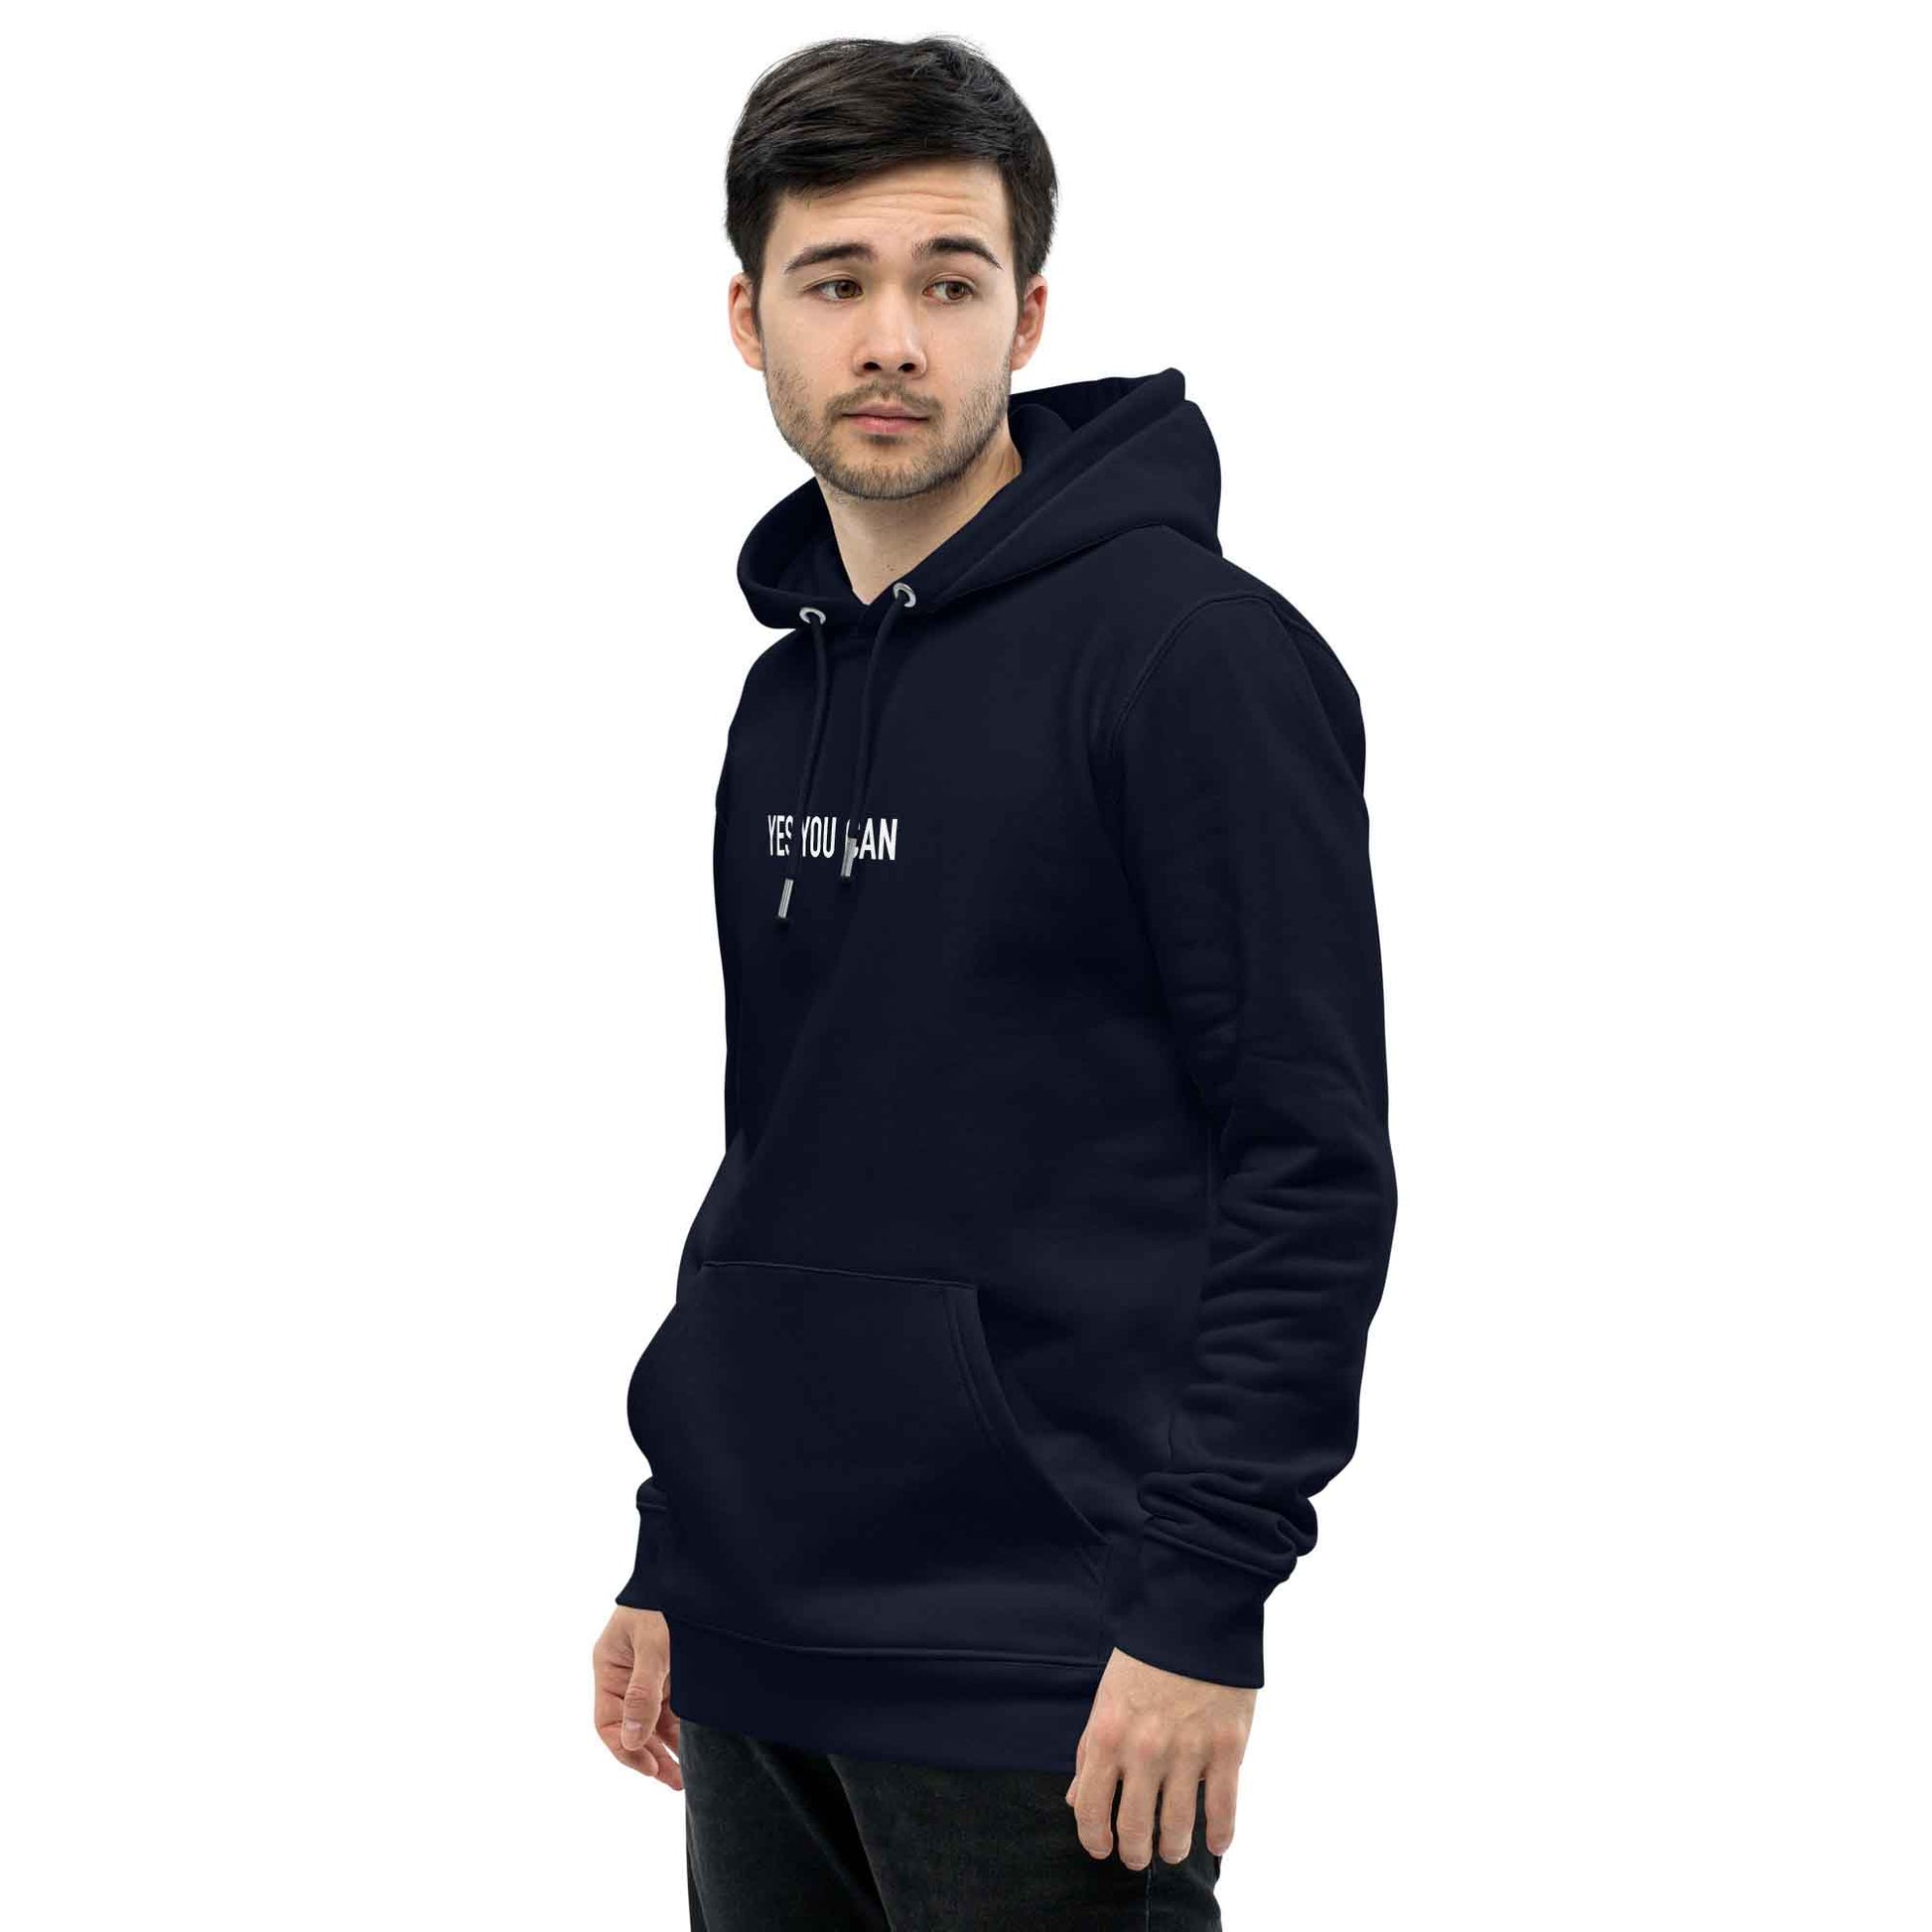 Men navy organic cotton hoodie with inspirational quote, "Yes You Can."